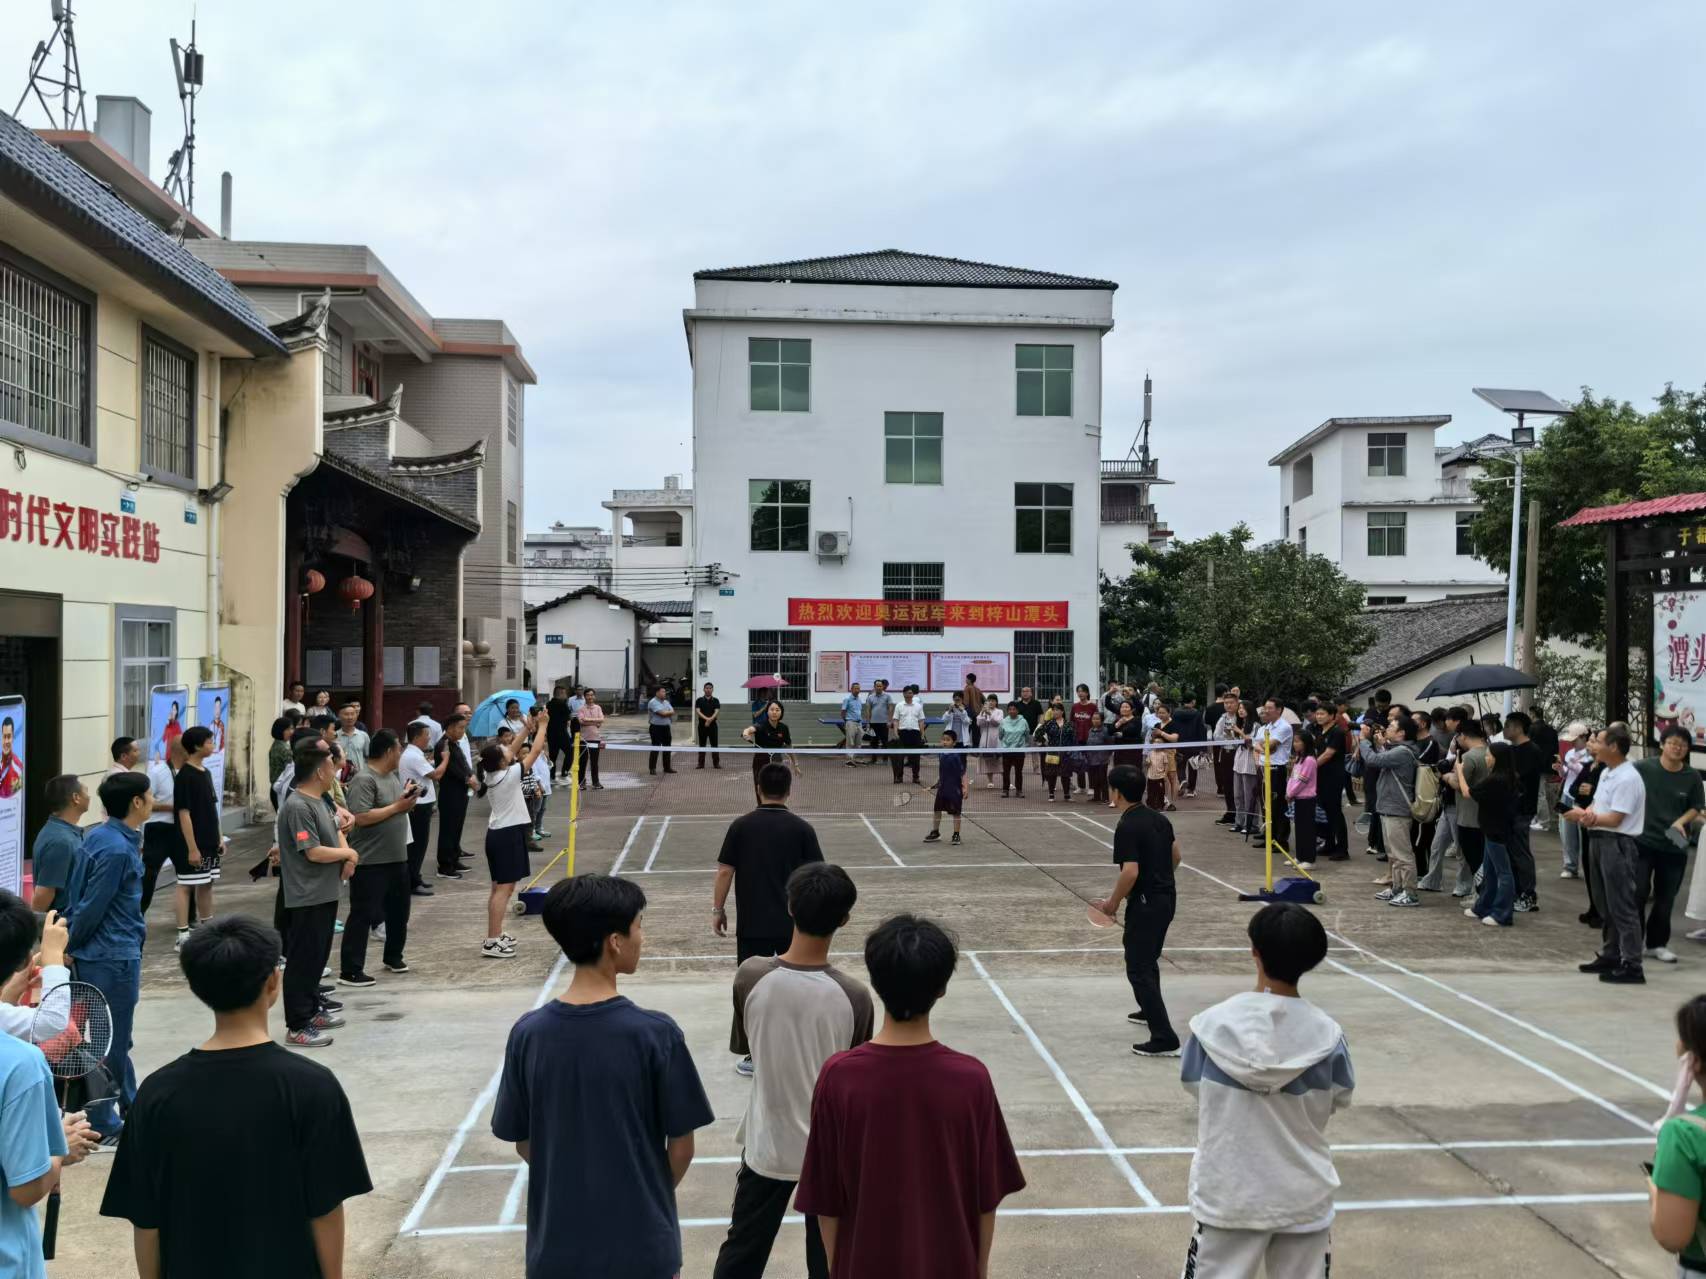  Zhao Yunlei played badminton with residents of Tantou Community. Photographed by Yang Lei, reporter of People's Daily Online